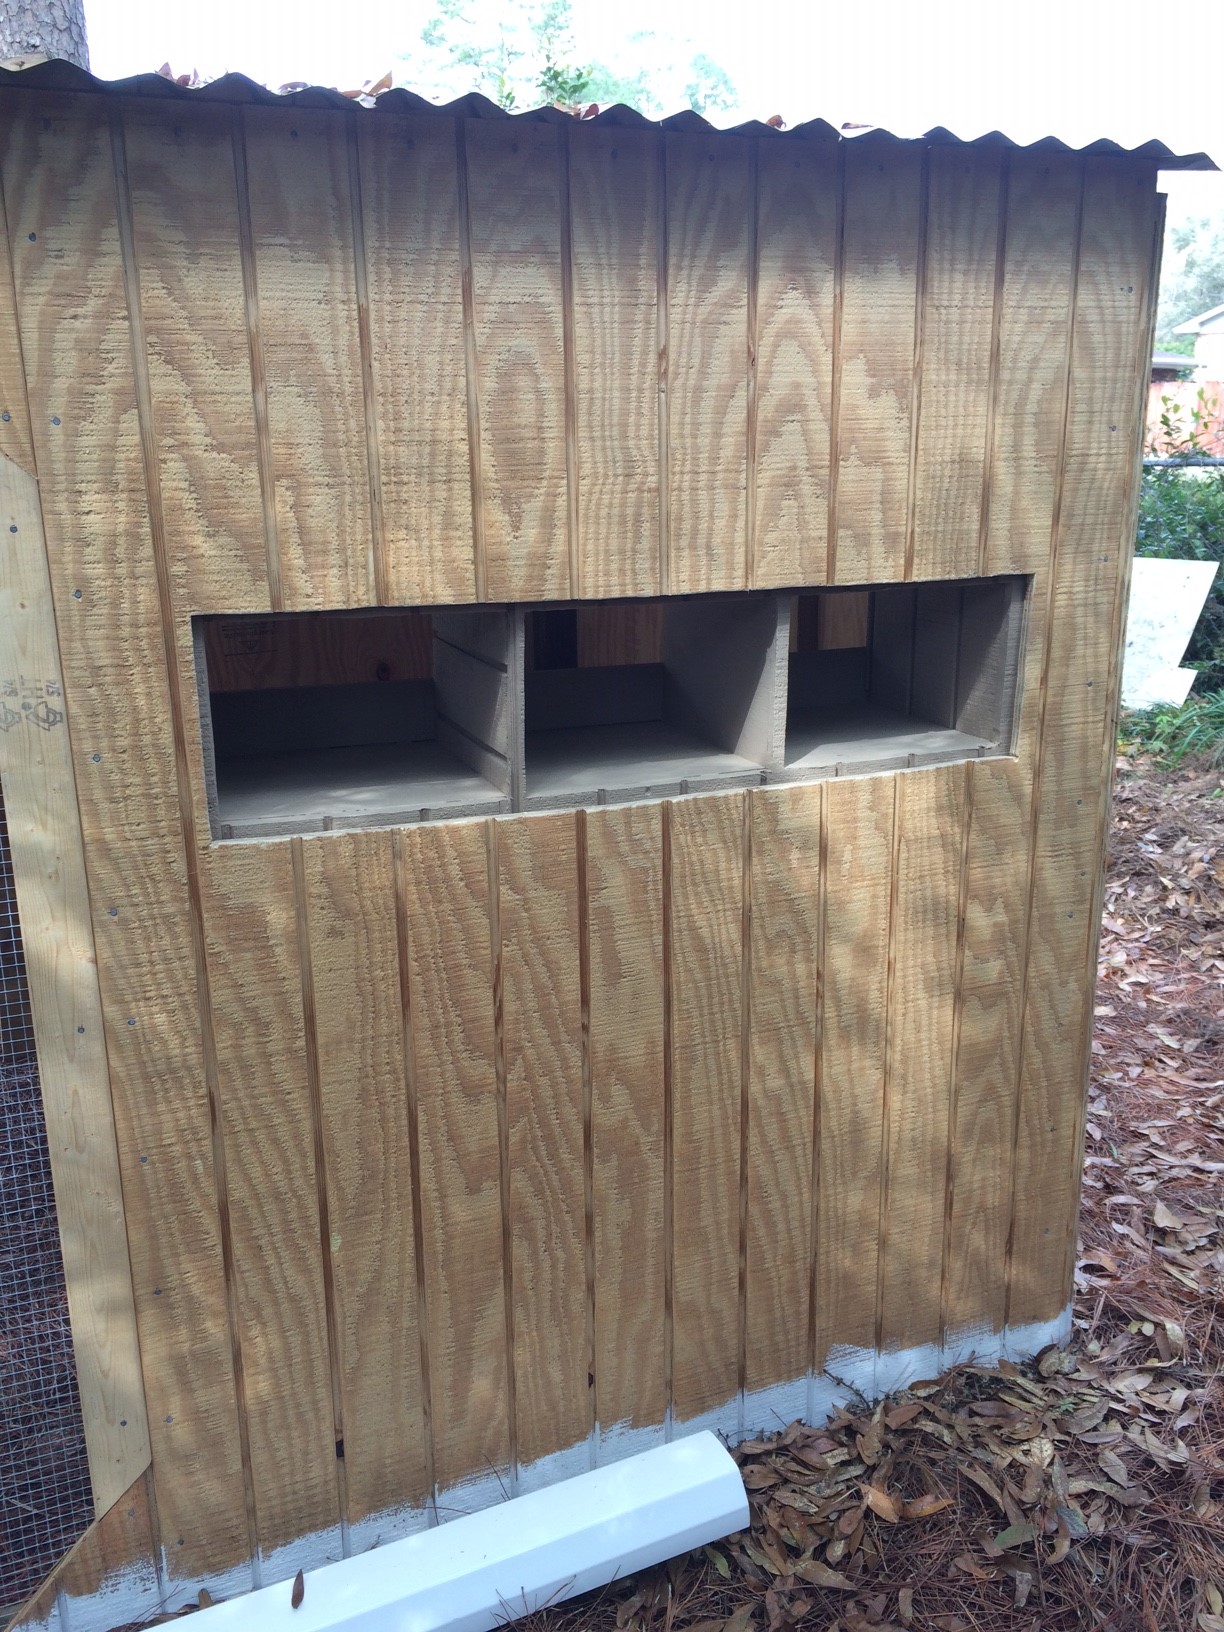 Nesting boxes were set in place inside, and holes cut in the wall to create access from the outside.